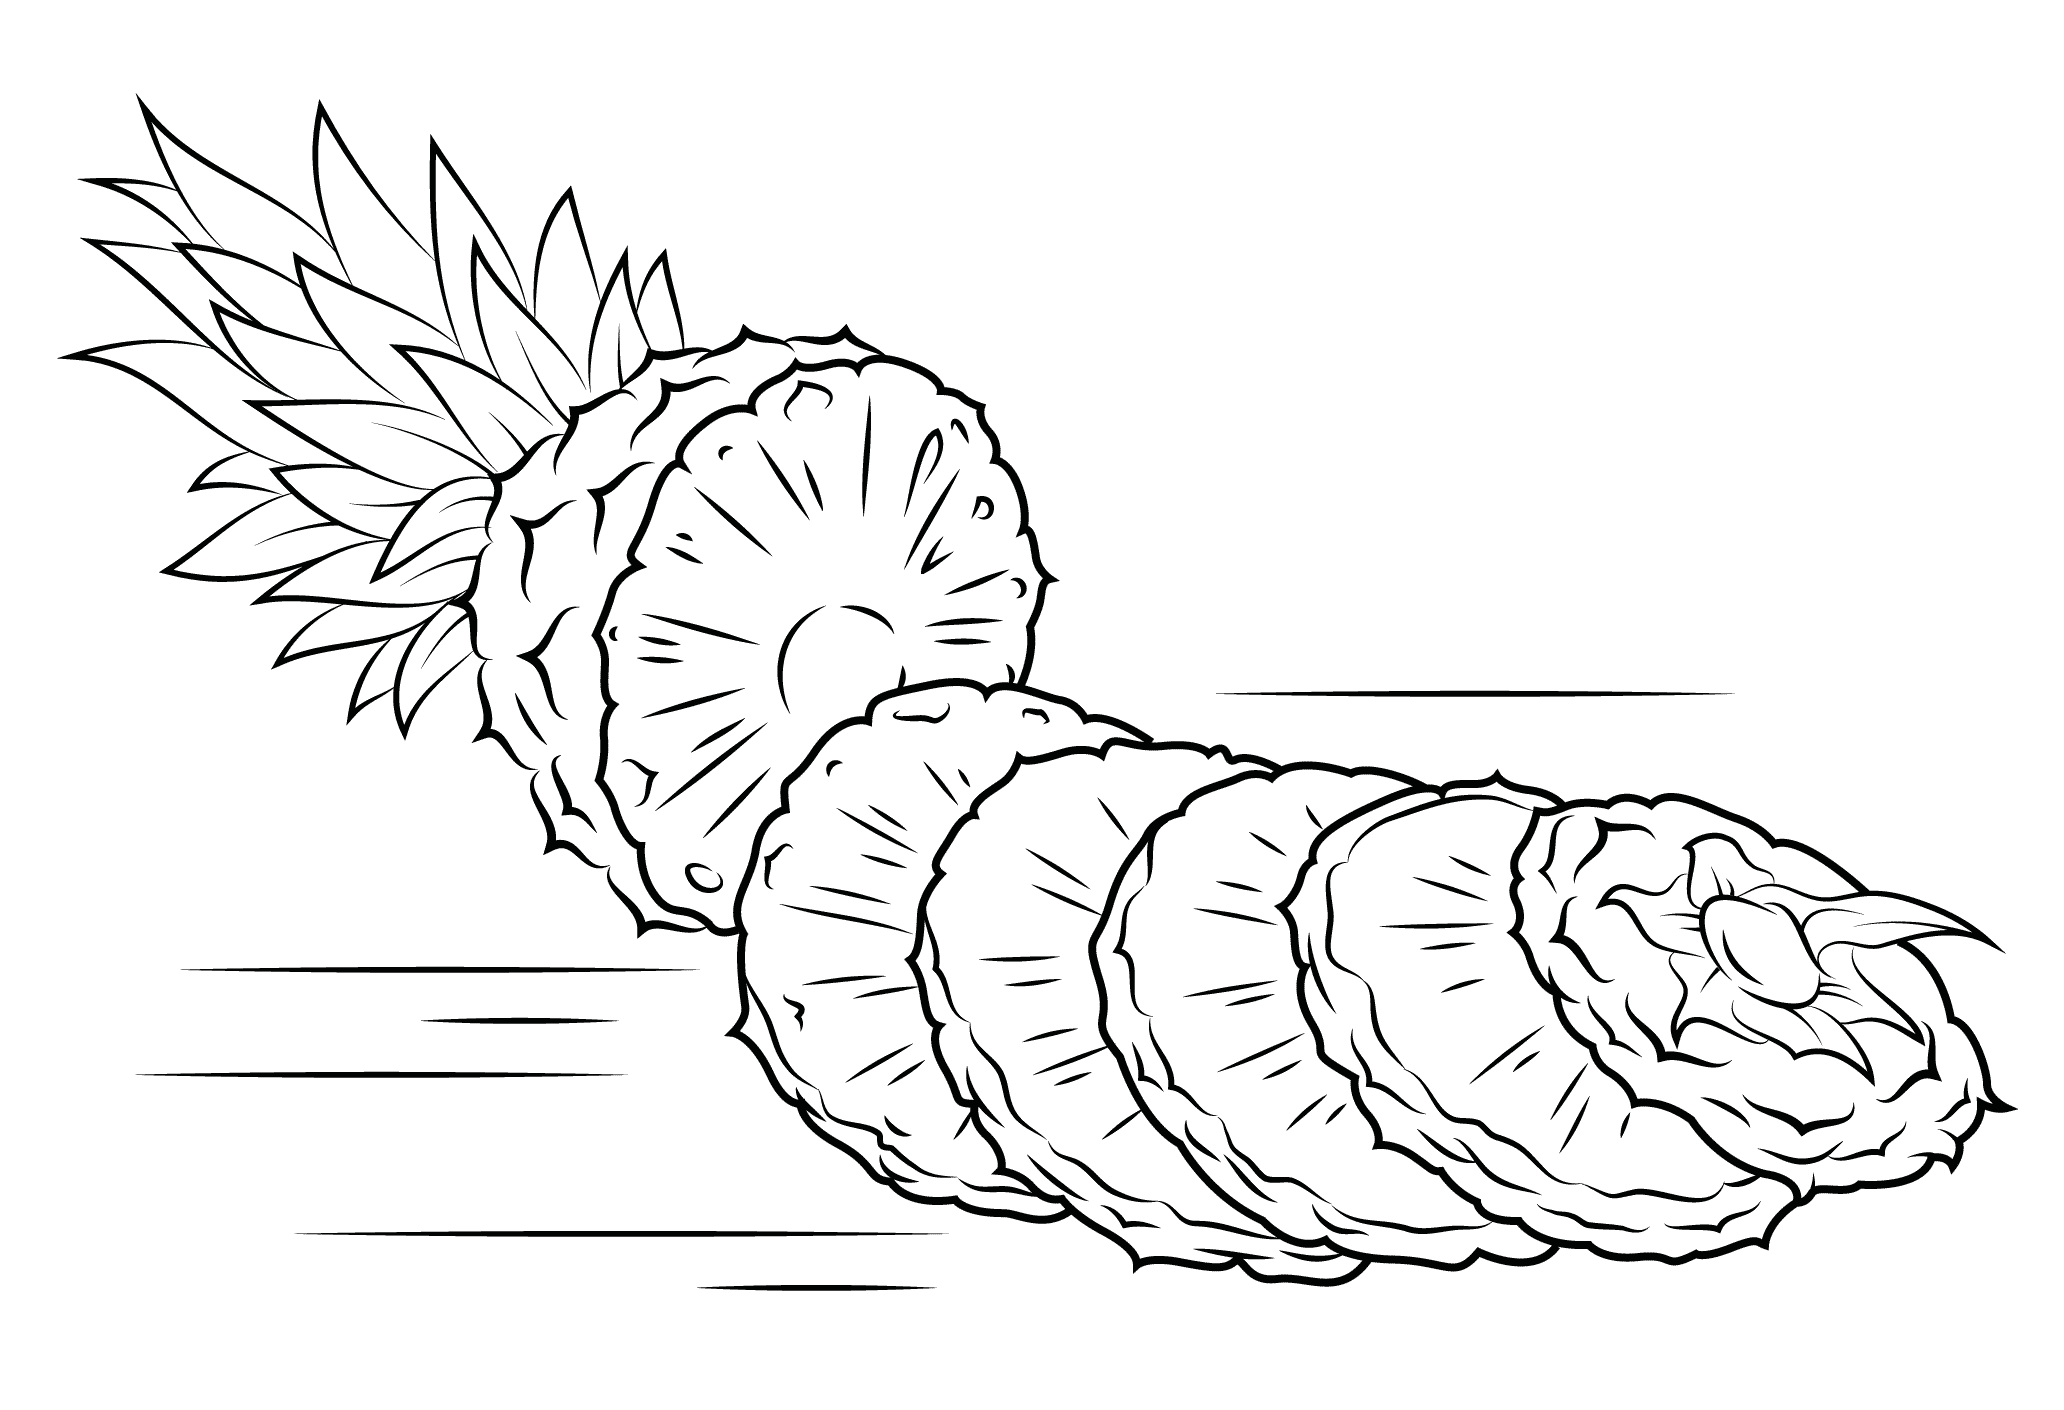 Free Pineapple coloring pages to print for kids Download print and color